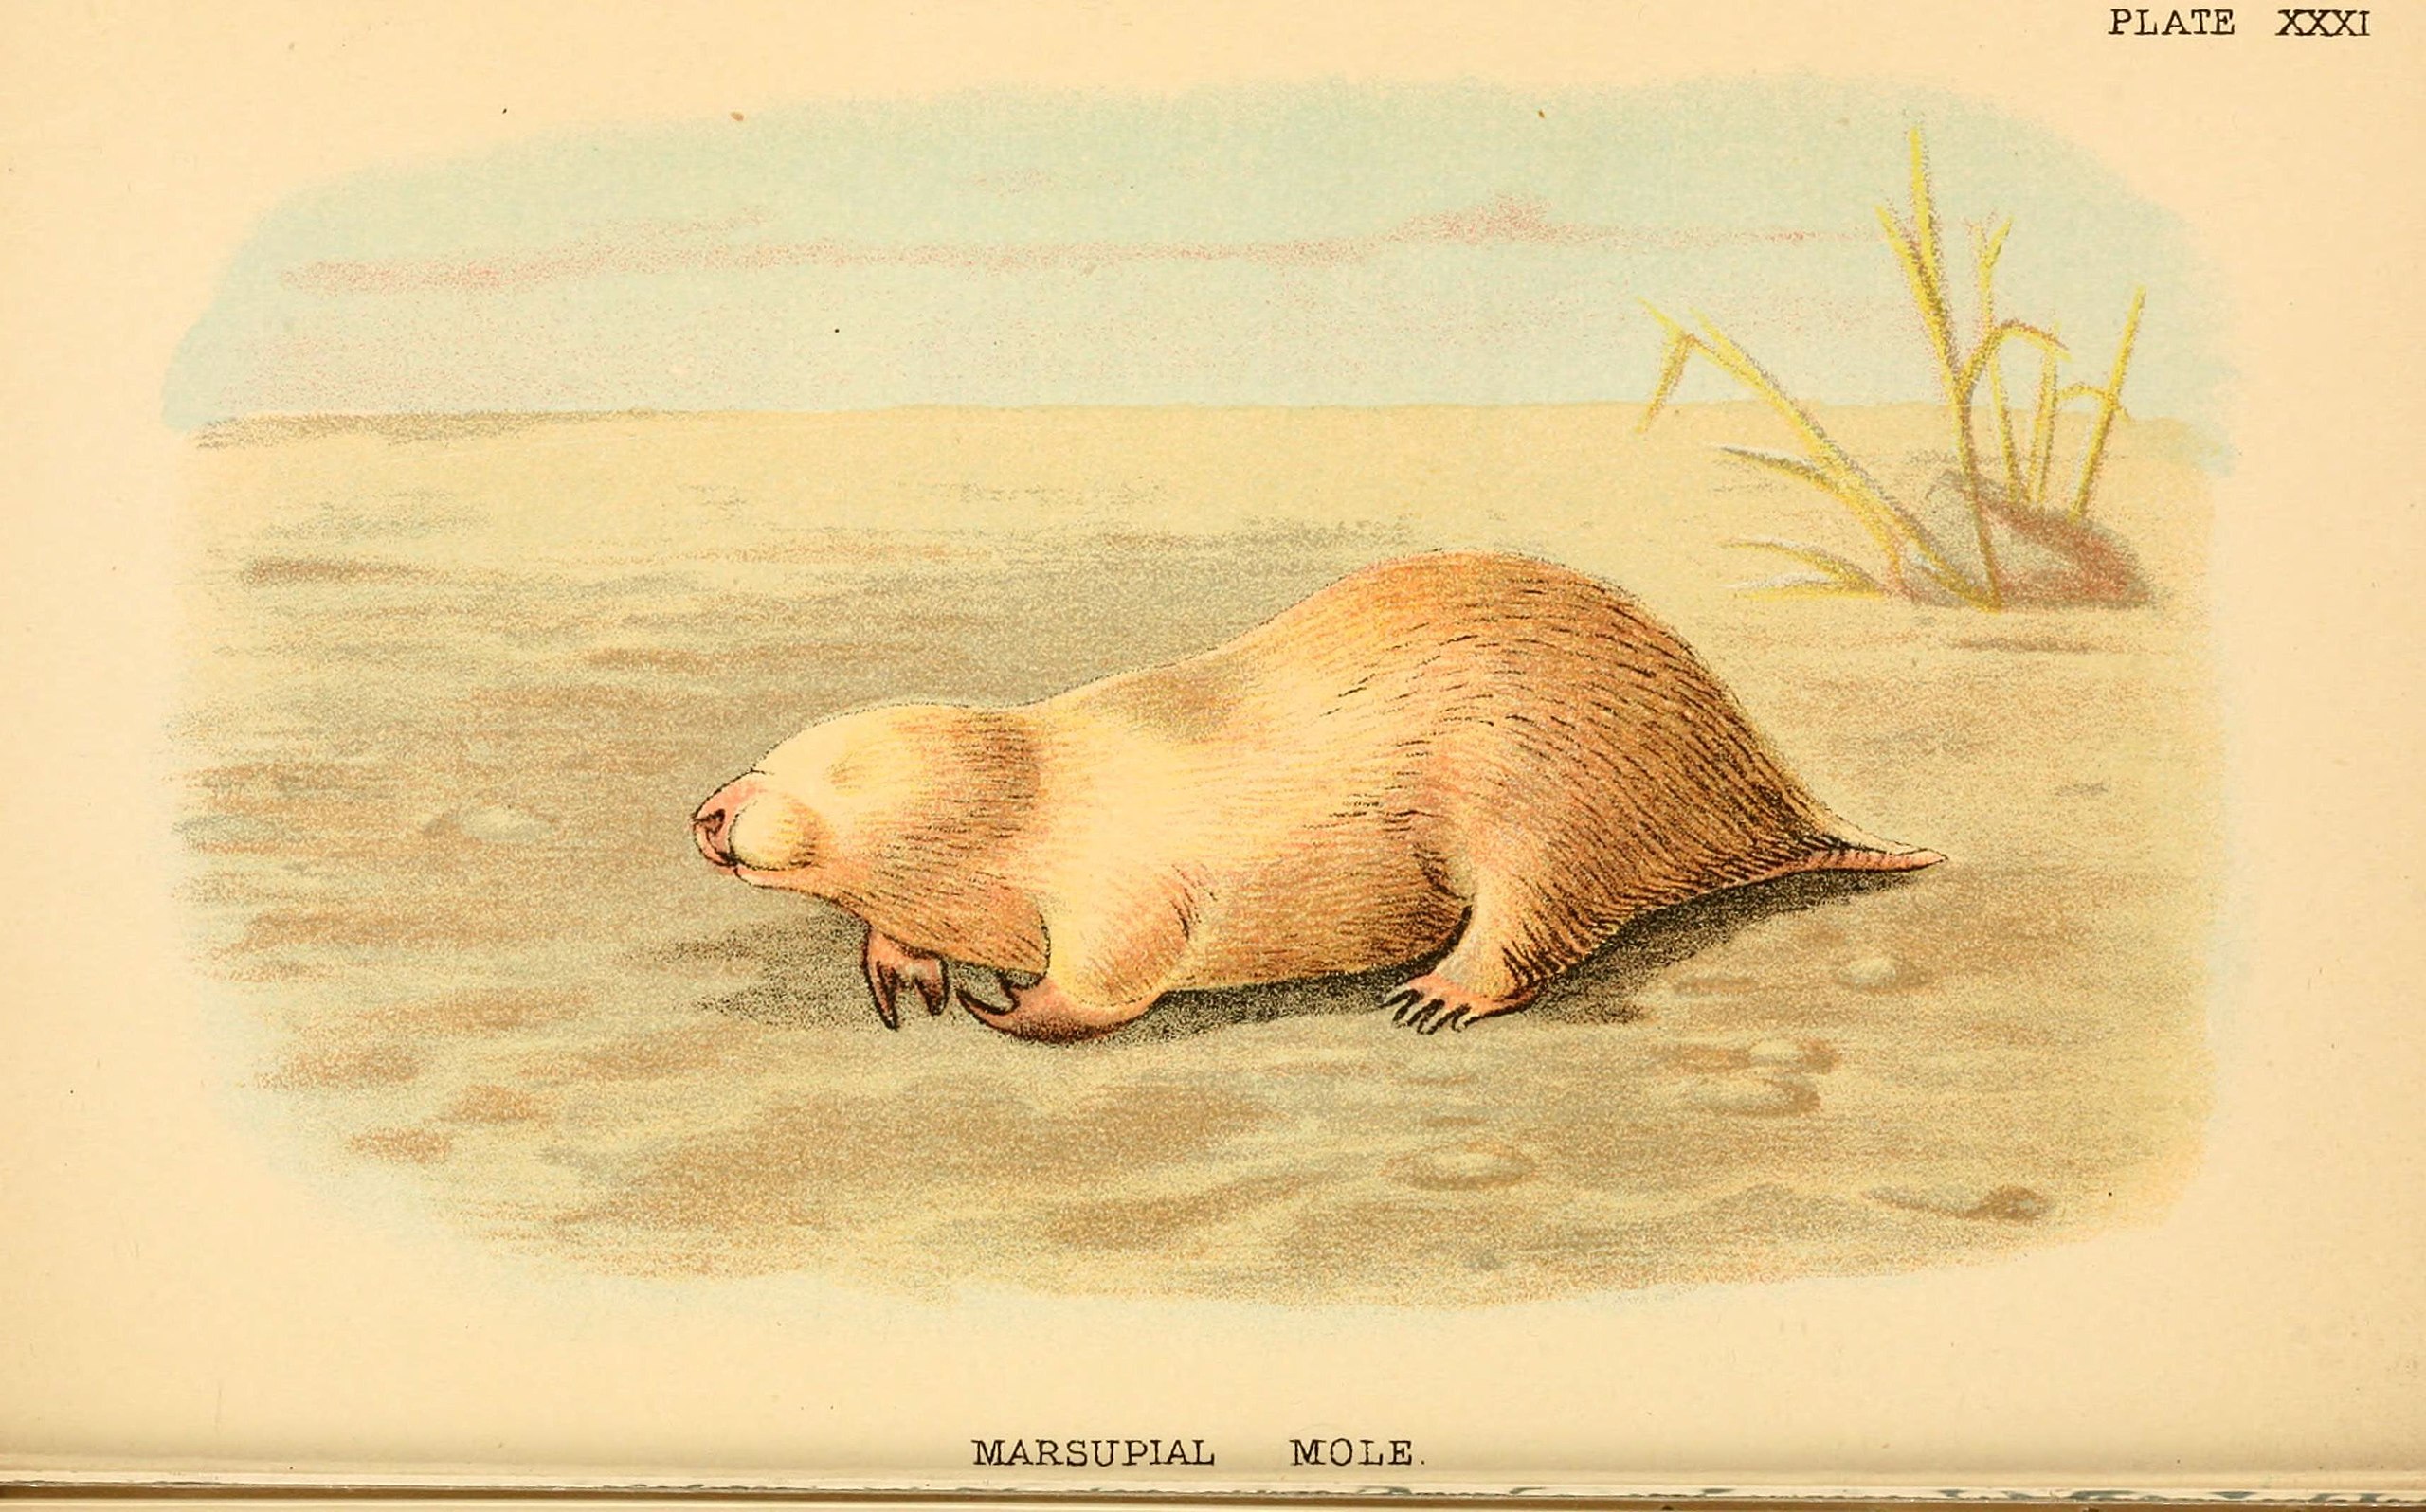 drawing of a small golden mole with grass in the background